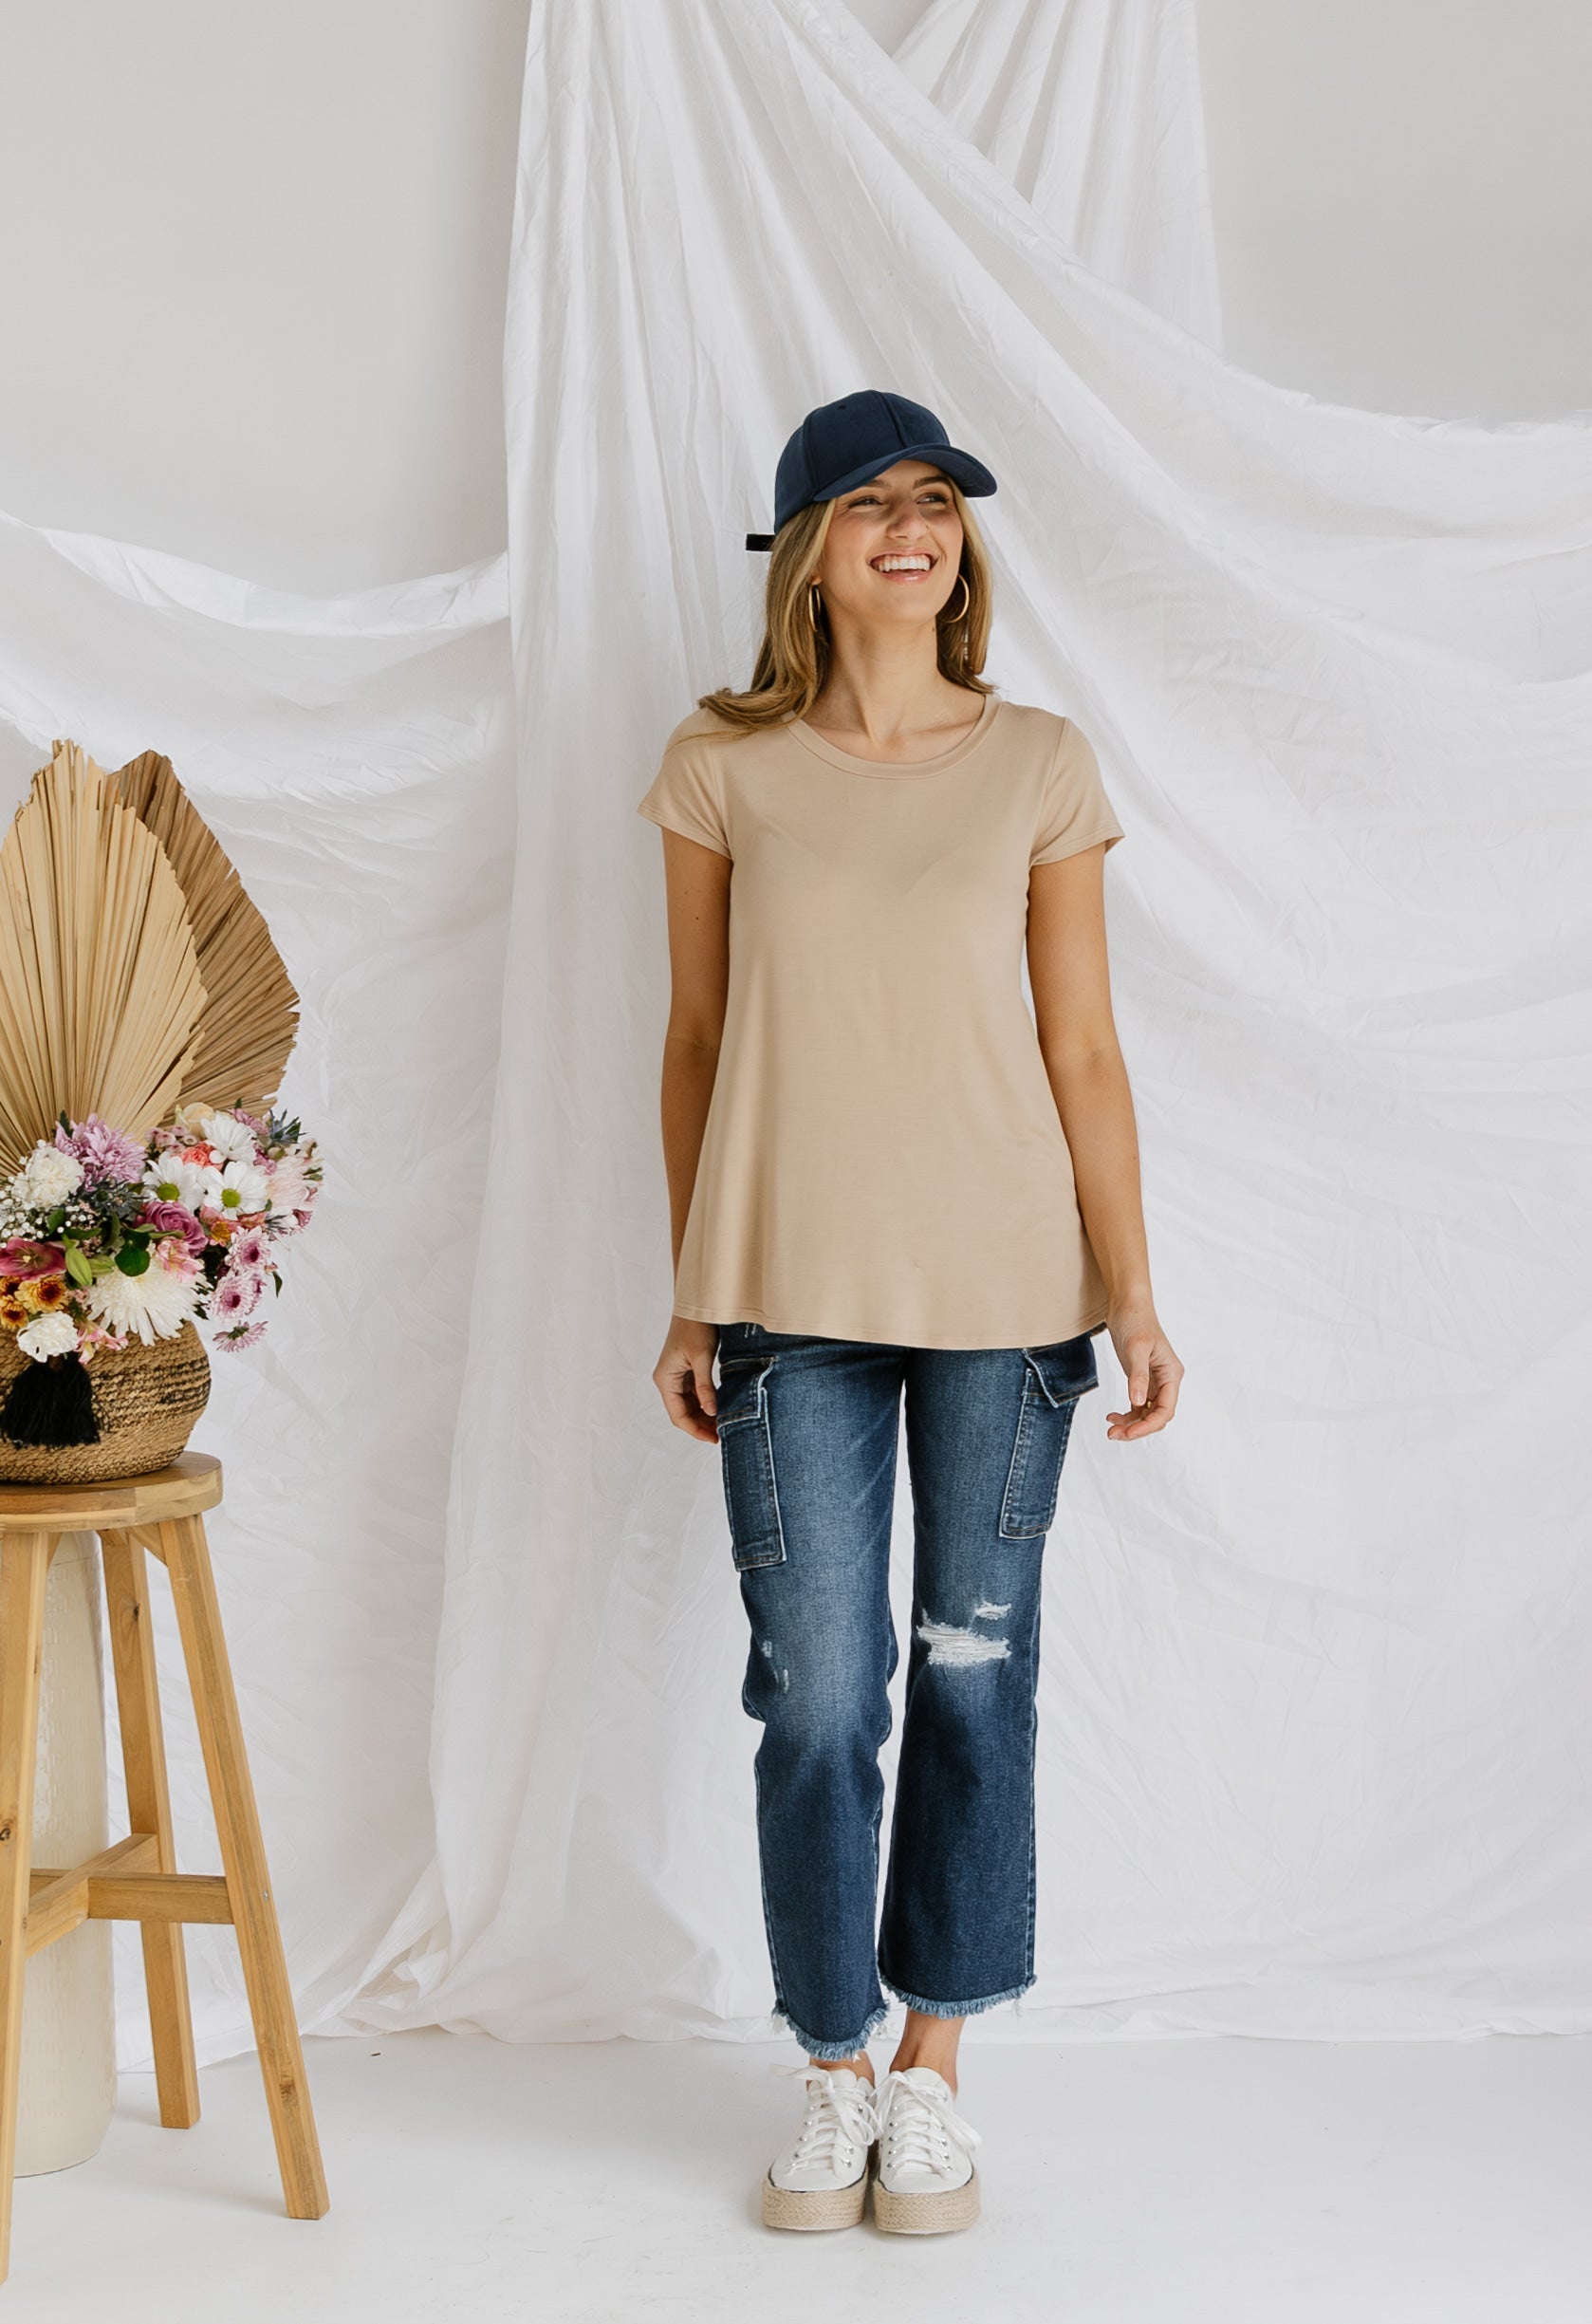 Cap Sleeve Top - TAUPE - willows clothing S/S Shirt